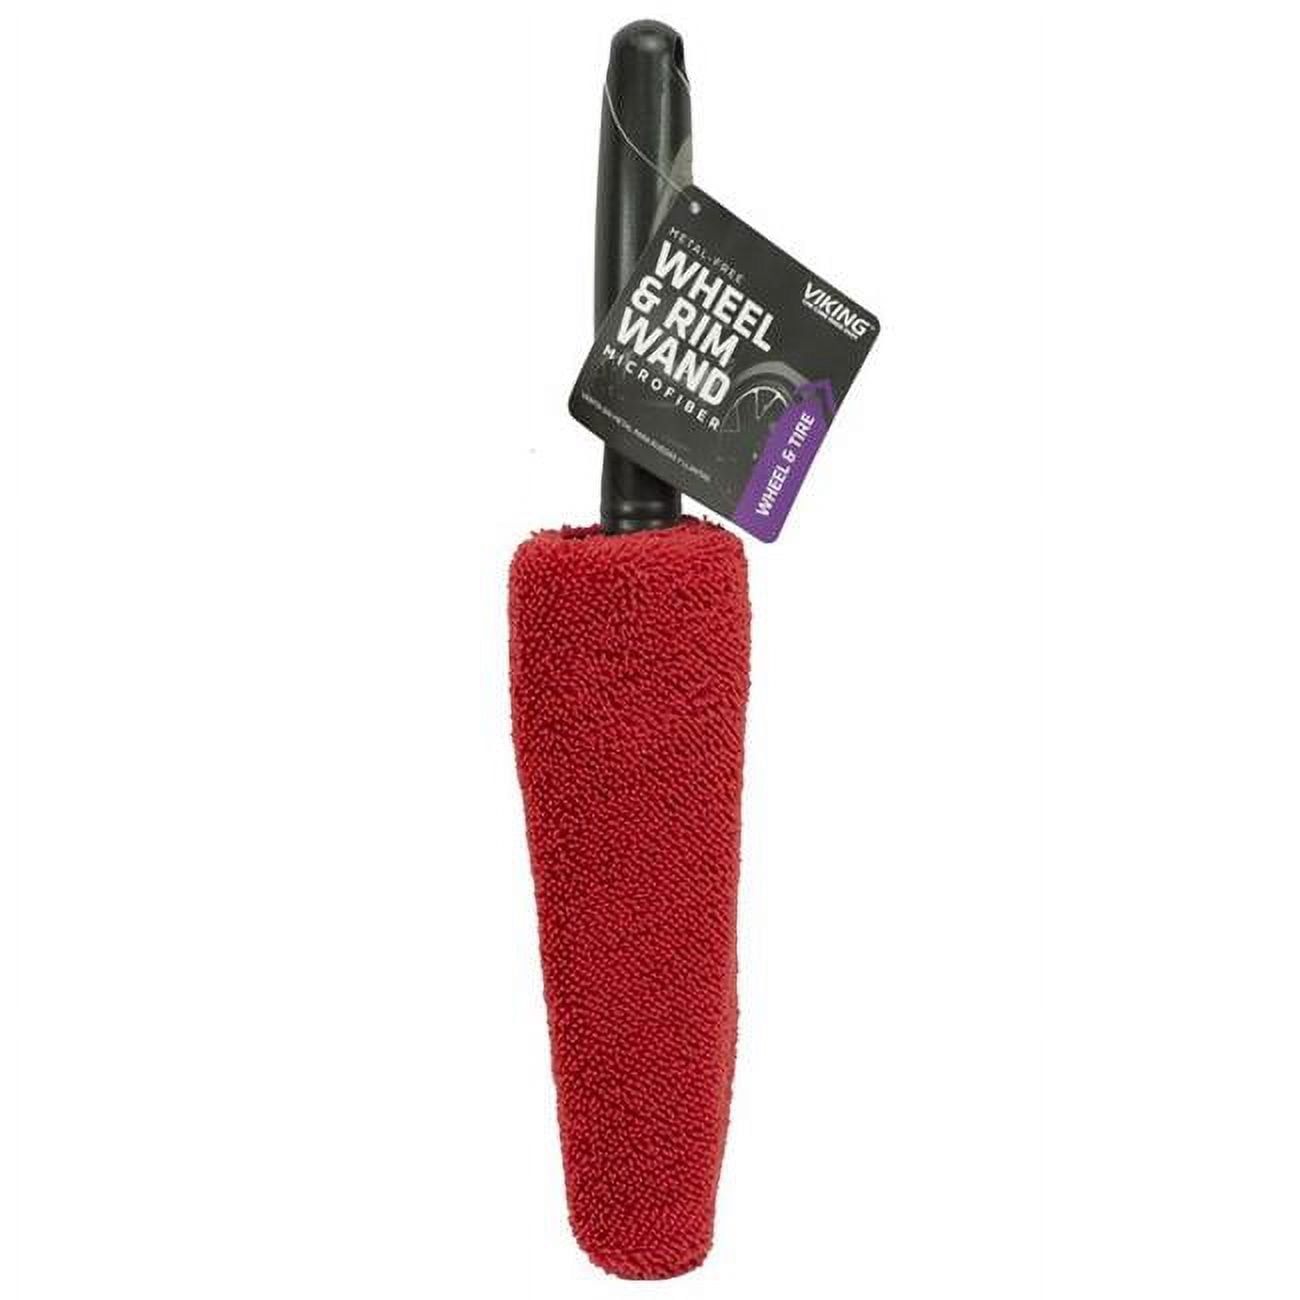 Auto Drive Brand 2 Pack Wooly Material Wheel Brush for Car Cleaning (Red &  Black) 